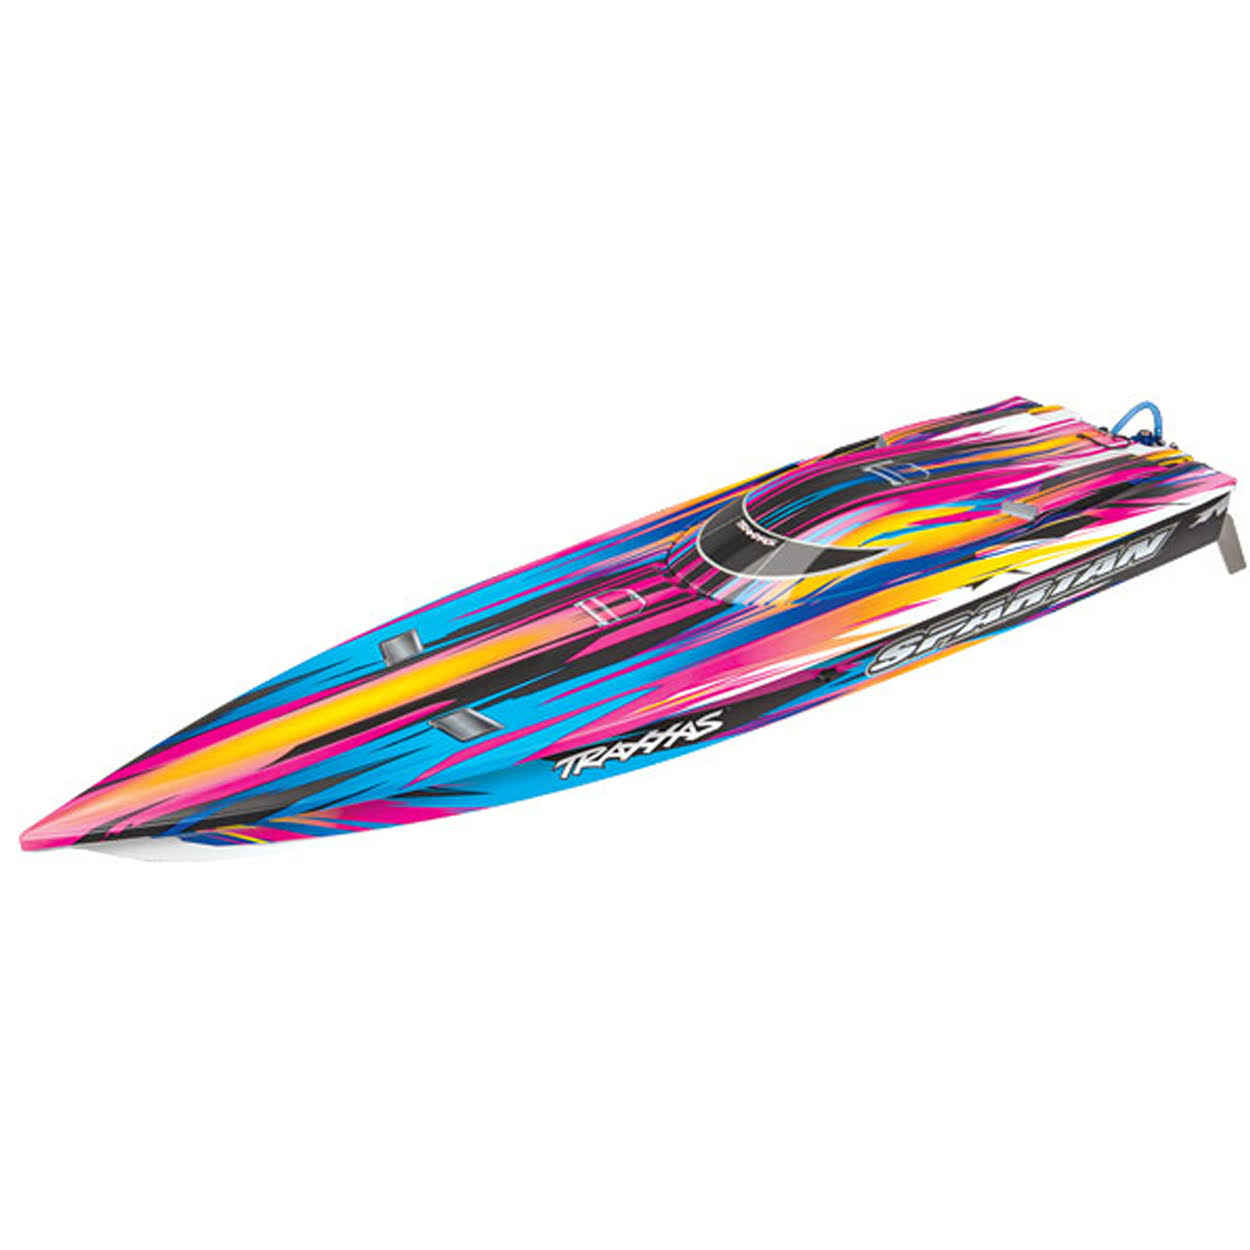 Traxxas Spartan Brushless 36" Race Boat, Pink